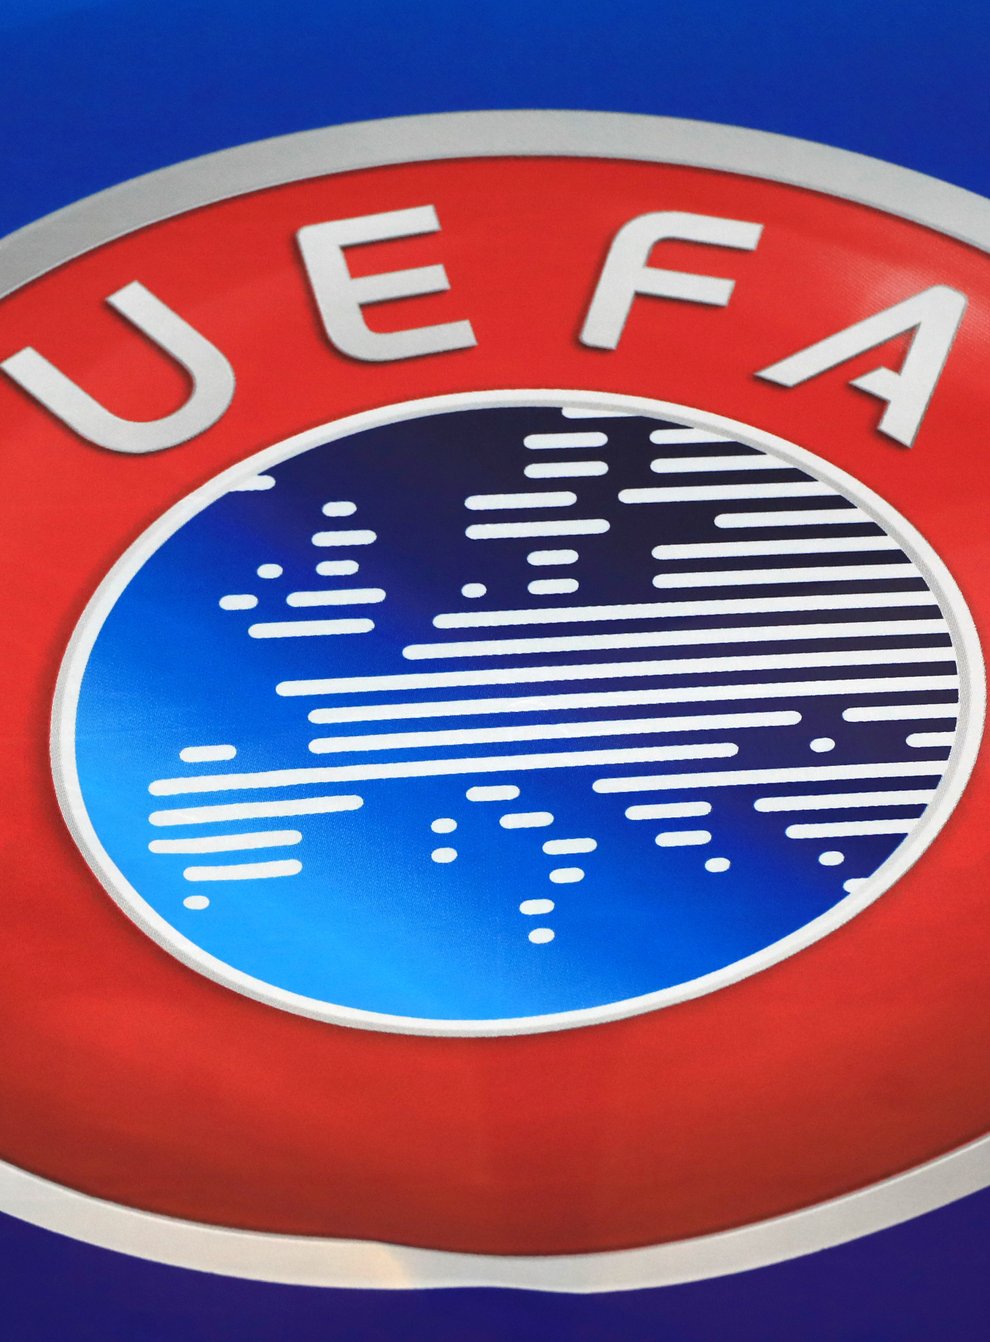 UEFA will not pursue legal proceedings against Juventus, Real Madrid and Barcelona over their continued fight to form a European Super League (Mike Egerton/PA)